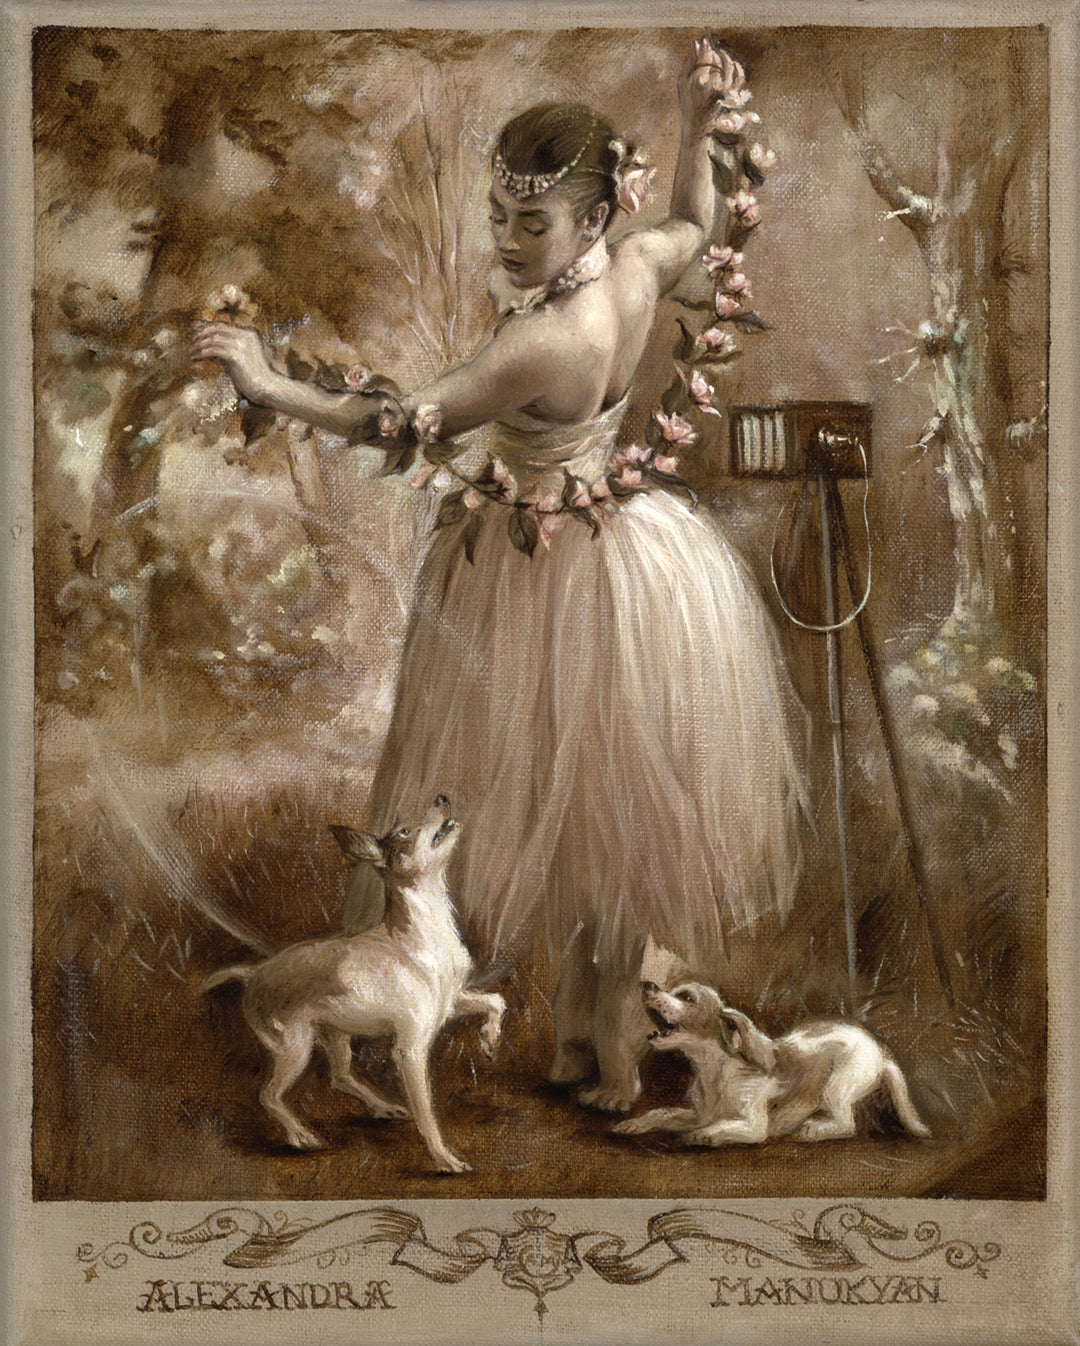 Alexandra Manukyan's painting, "Alexandra Manukyan - 'She Walks in Beauty'," depicts a ballerina gracefully surrounded by dogs. The artist expertly captures the beauty and elegance of the ballerina.